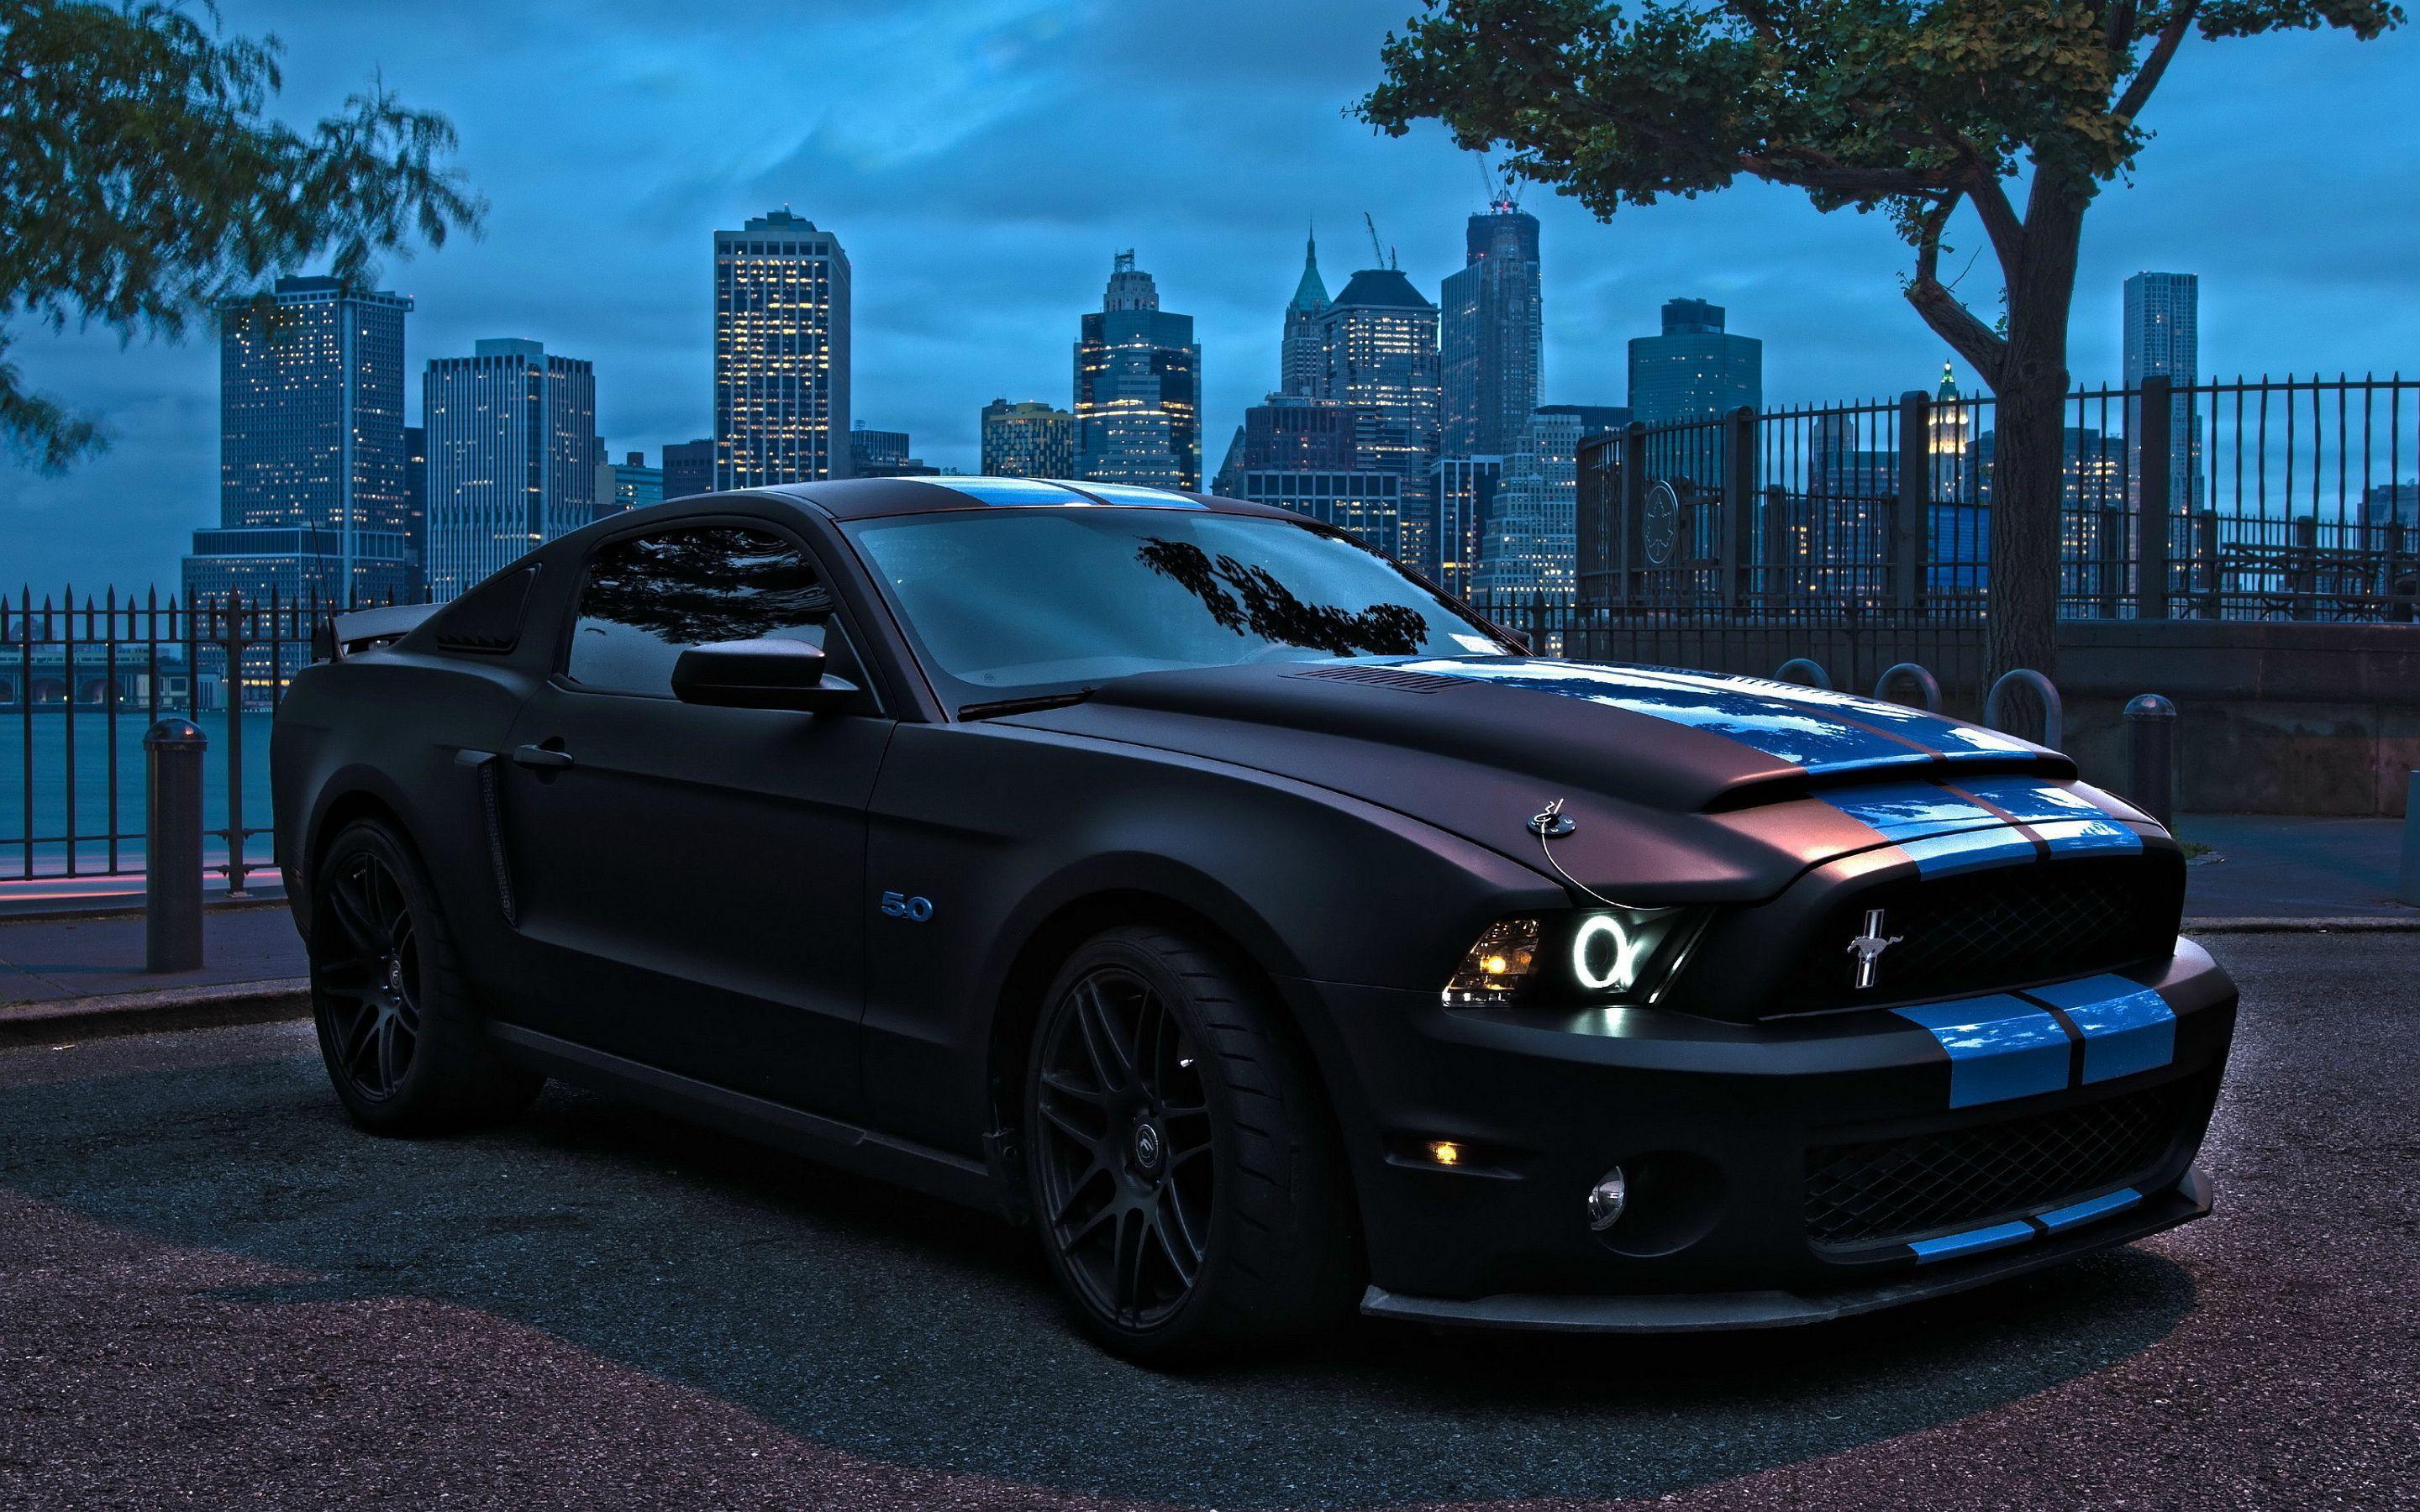 Ford Mustang Shelby Wallpaper